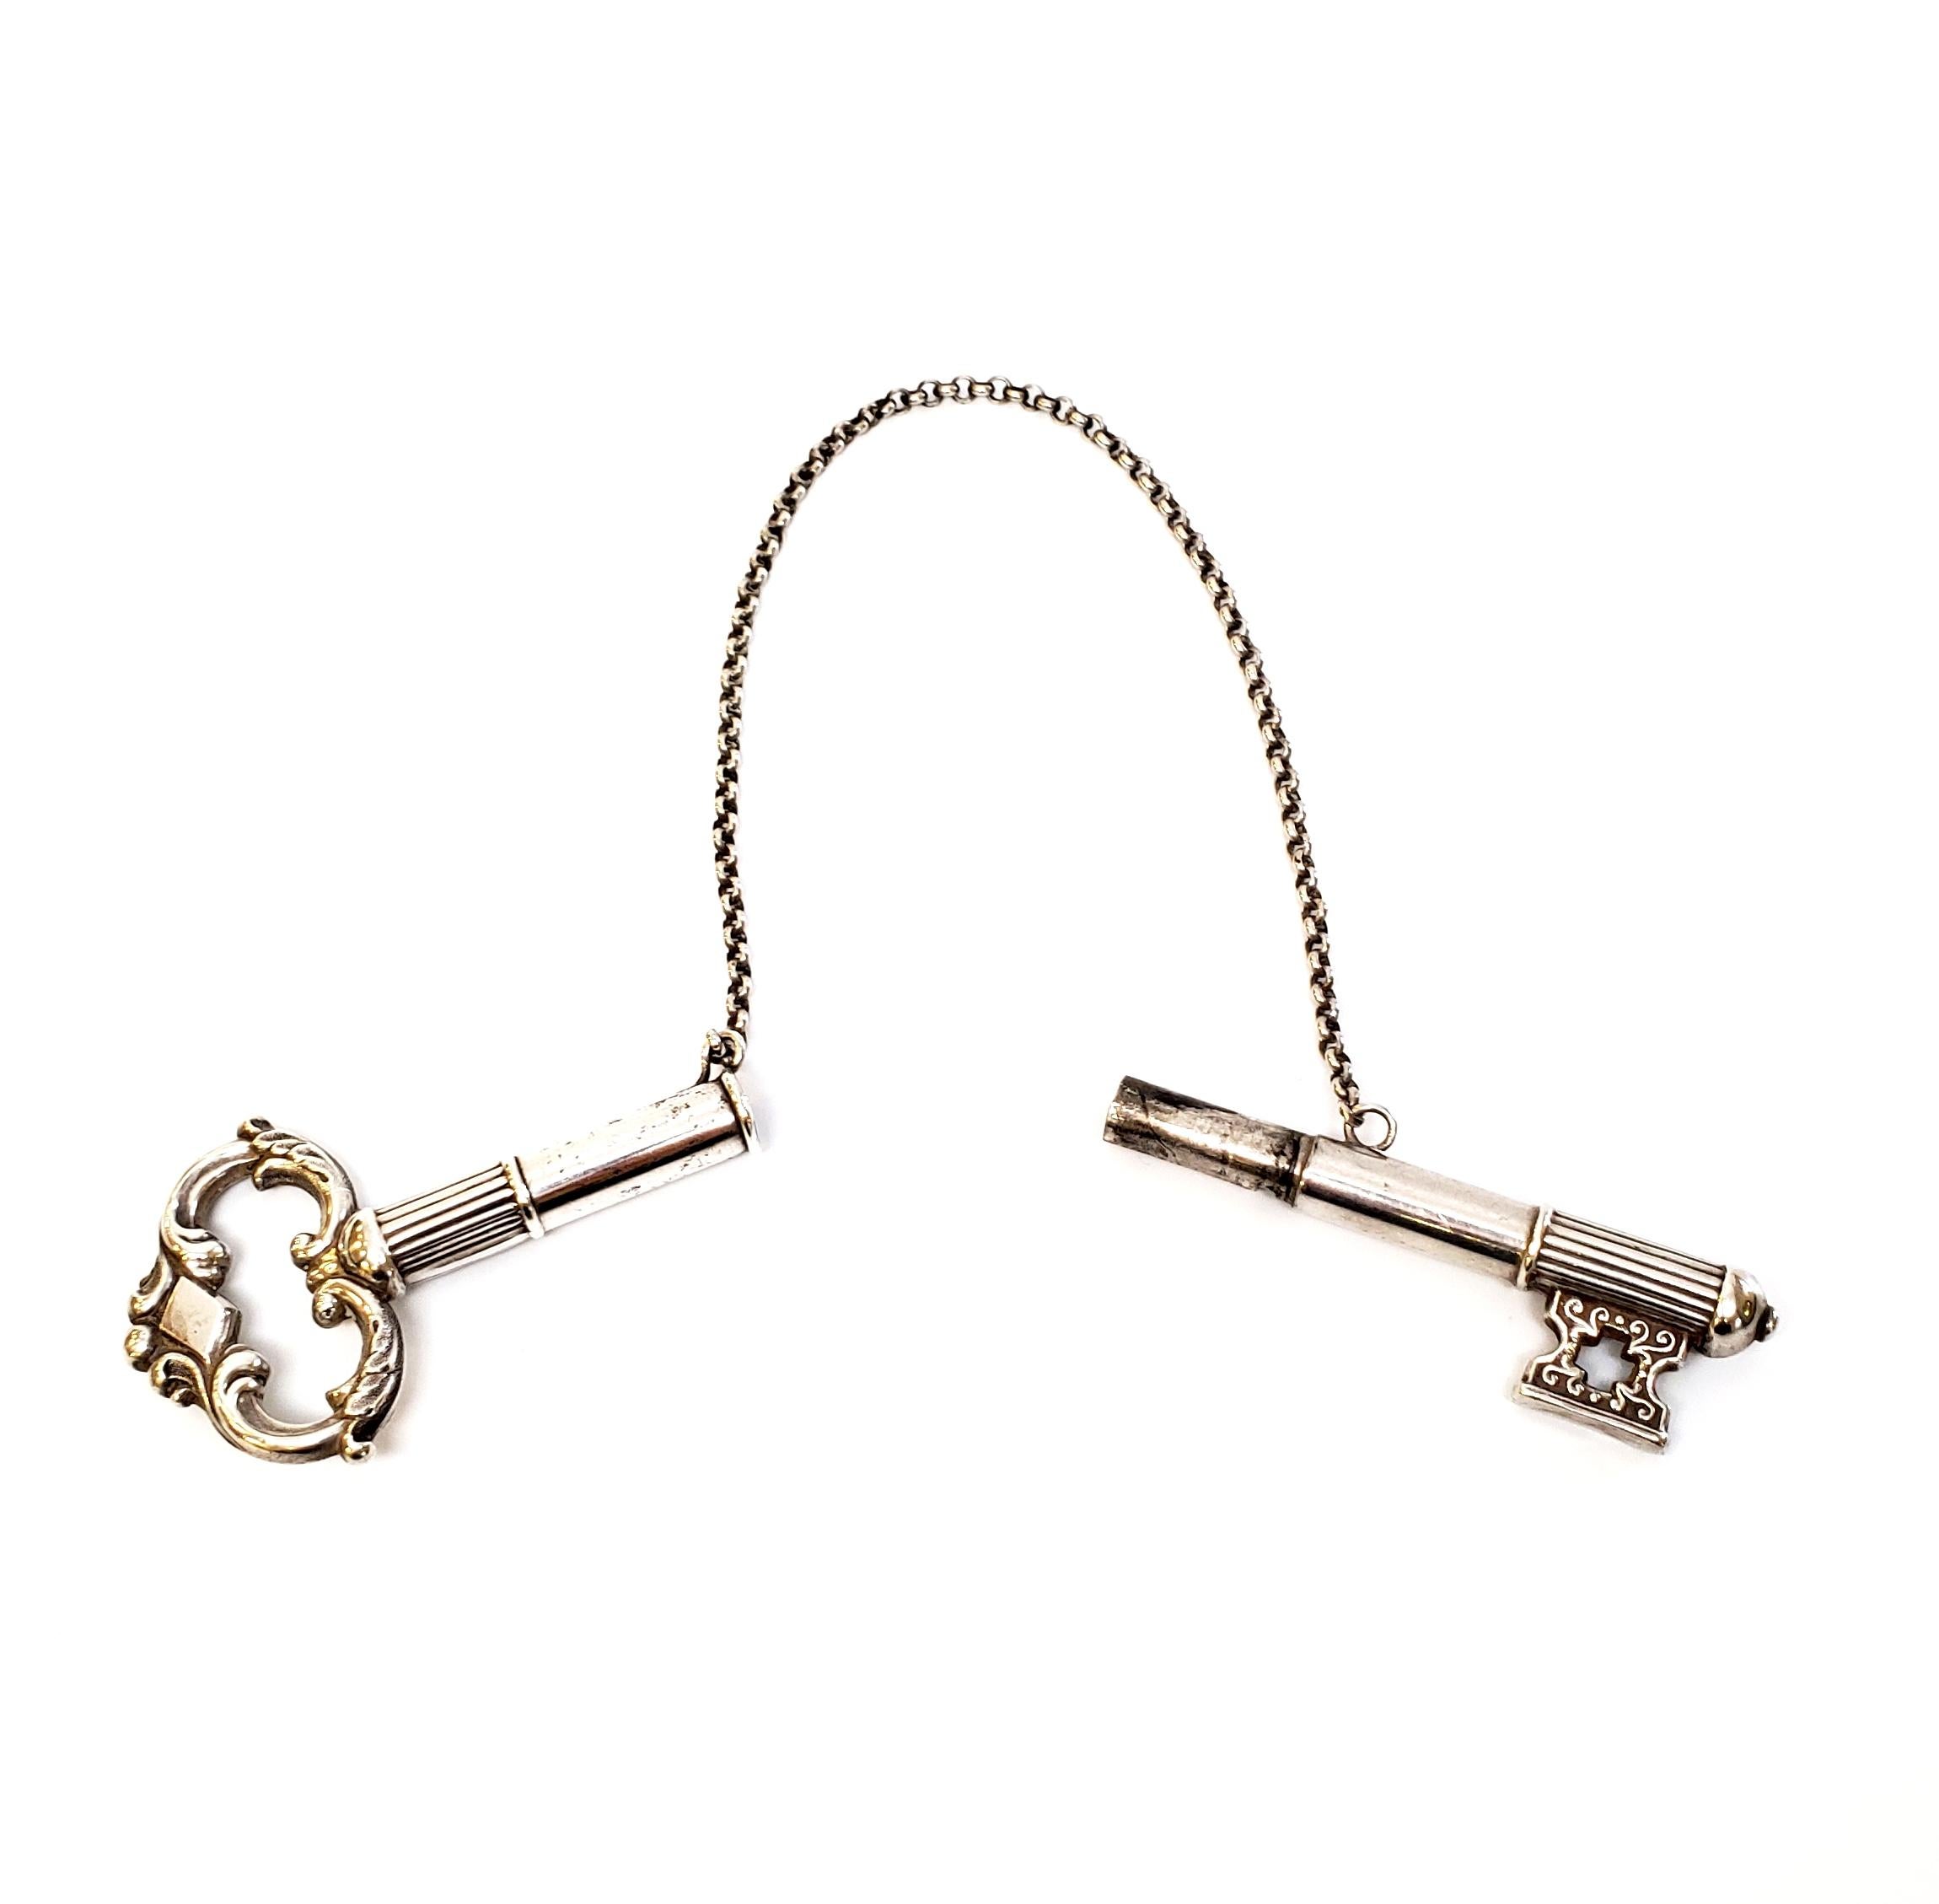 20th Century Silver Key Needle Case with Chatelaine Chain